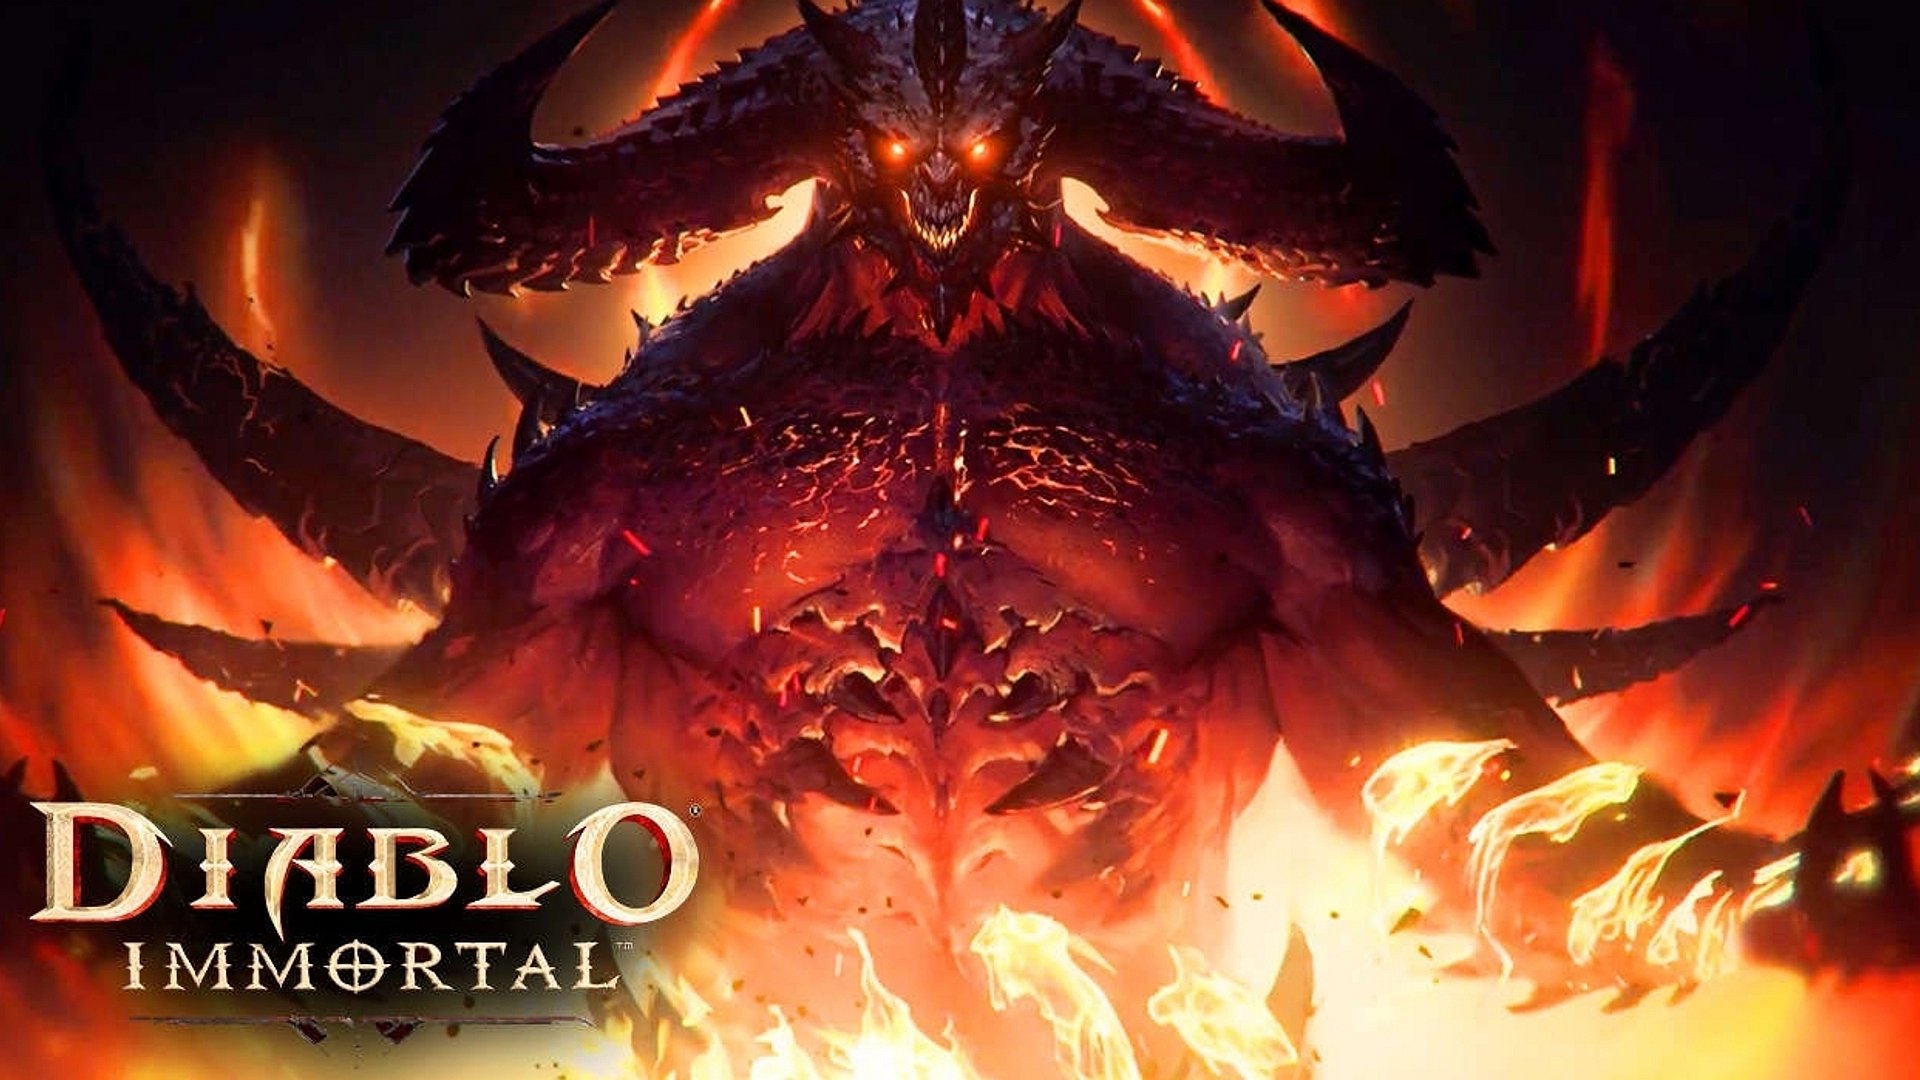 Diablo Immortal Release Pushed to 2022